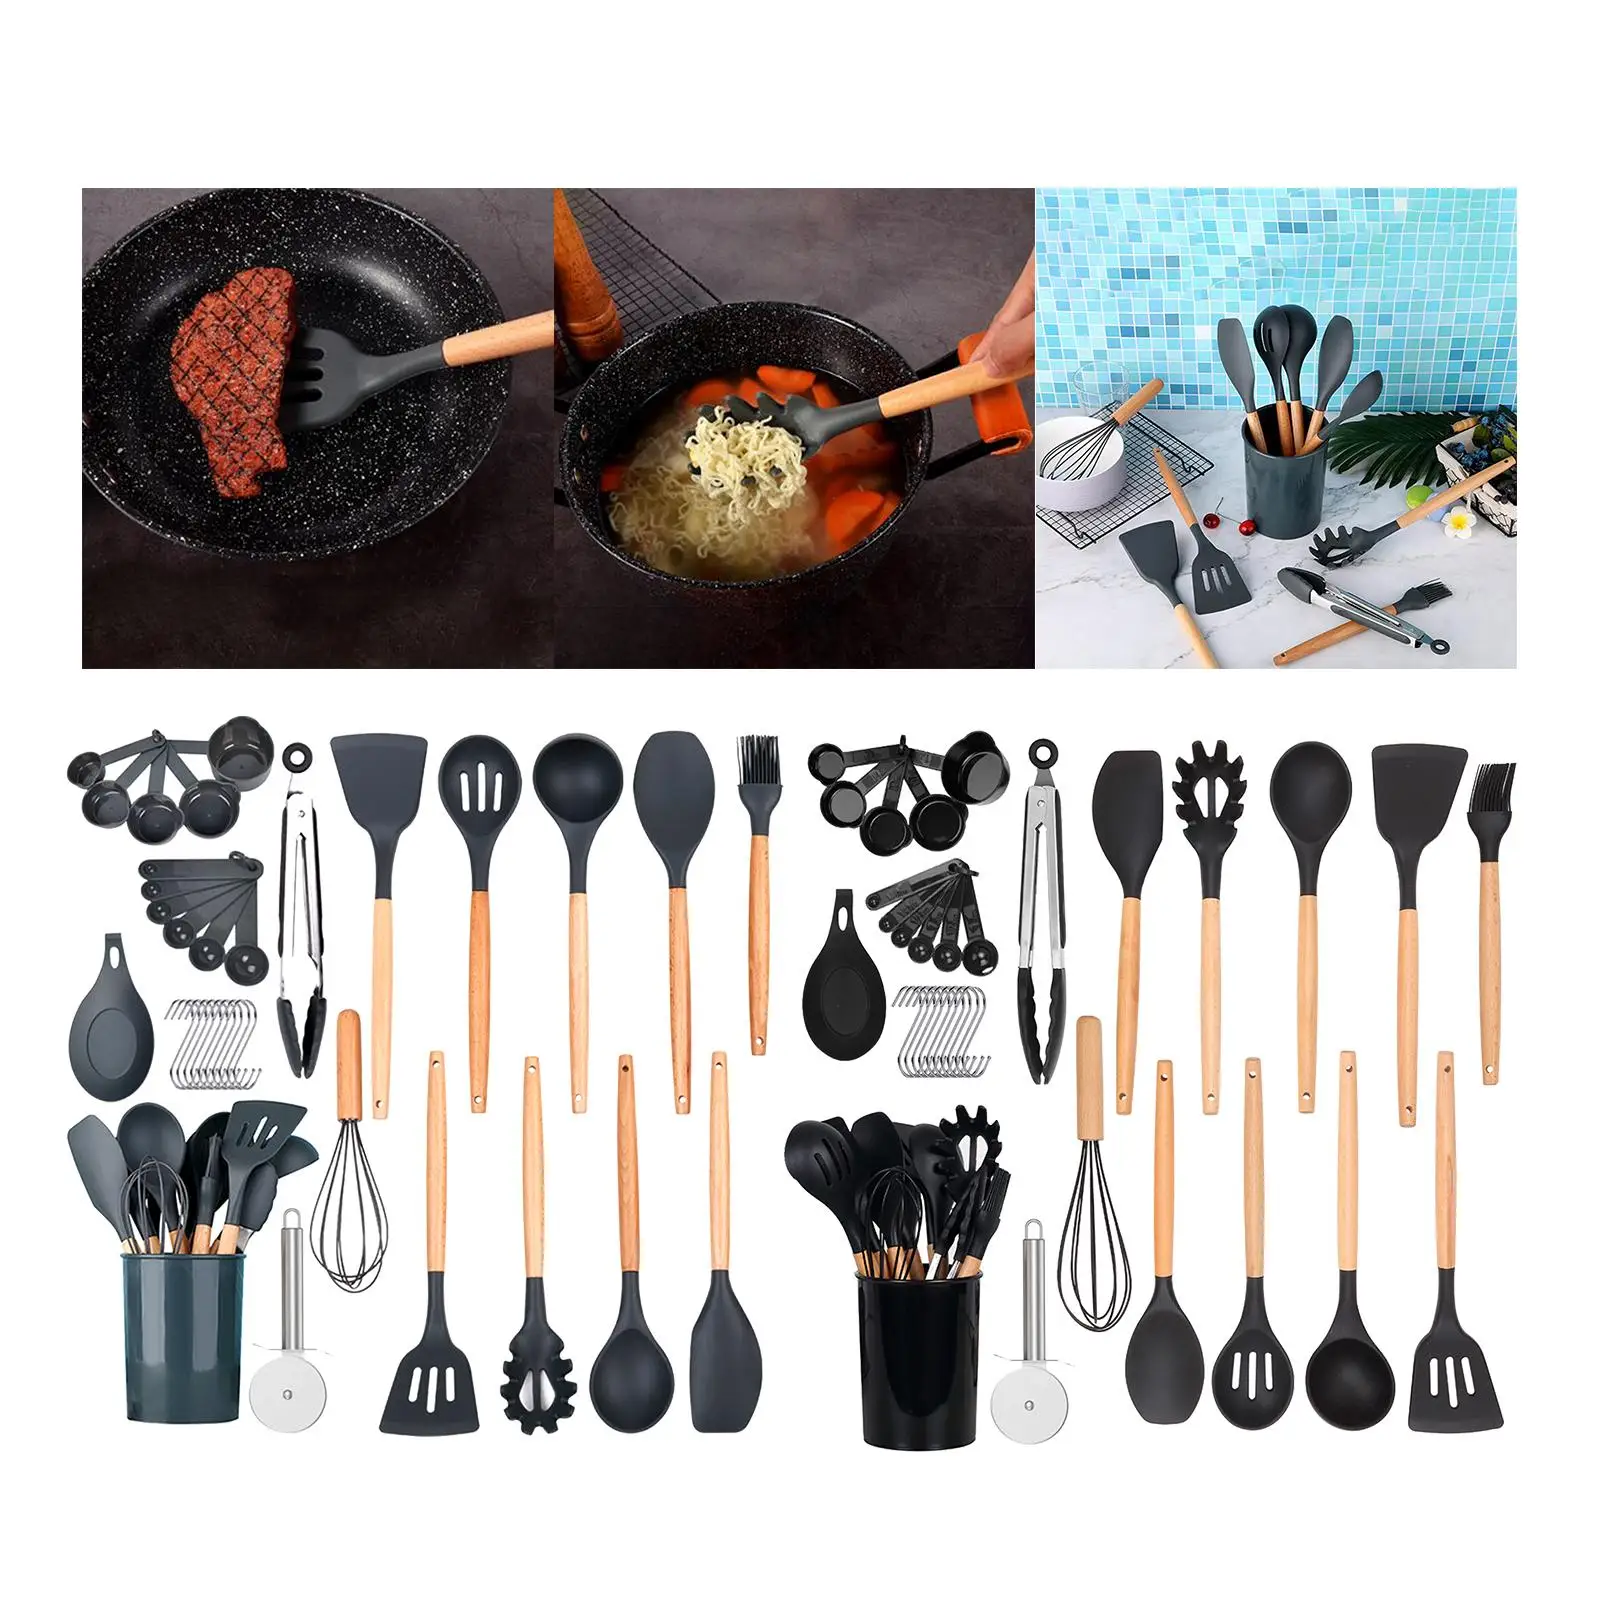 35x Multifunctional Kitchen Gadgets Cookware Set Cookware Whisk with Holder Heat Resistant Spoon Brush for Professionals